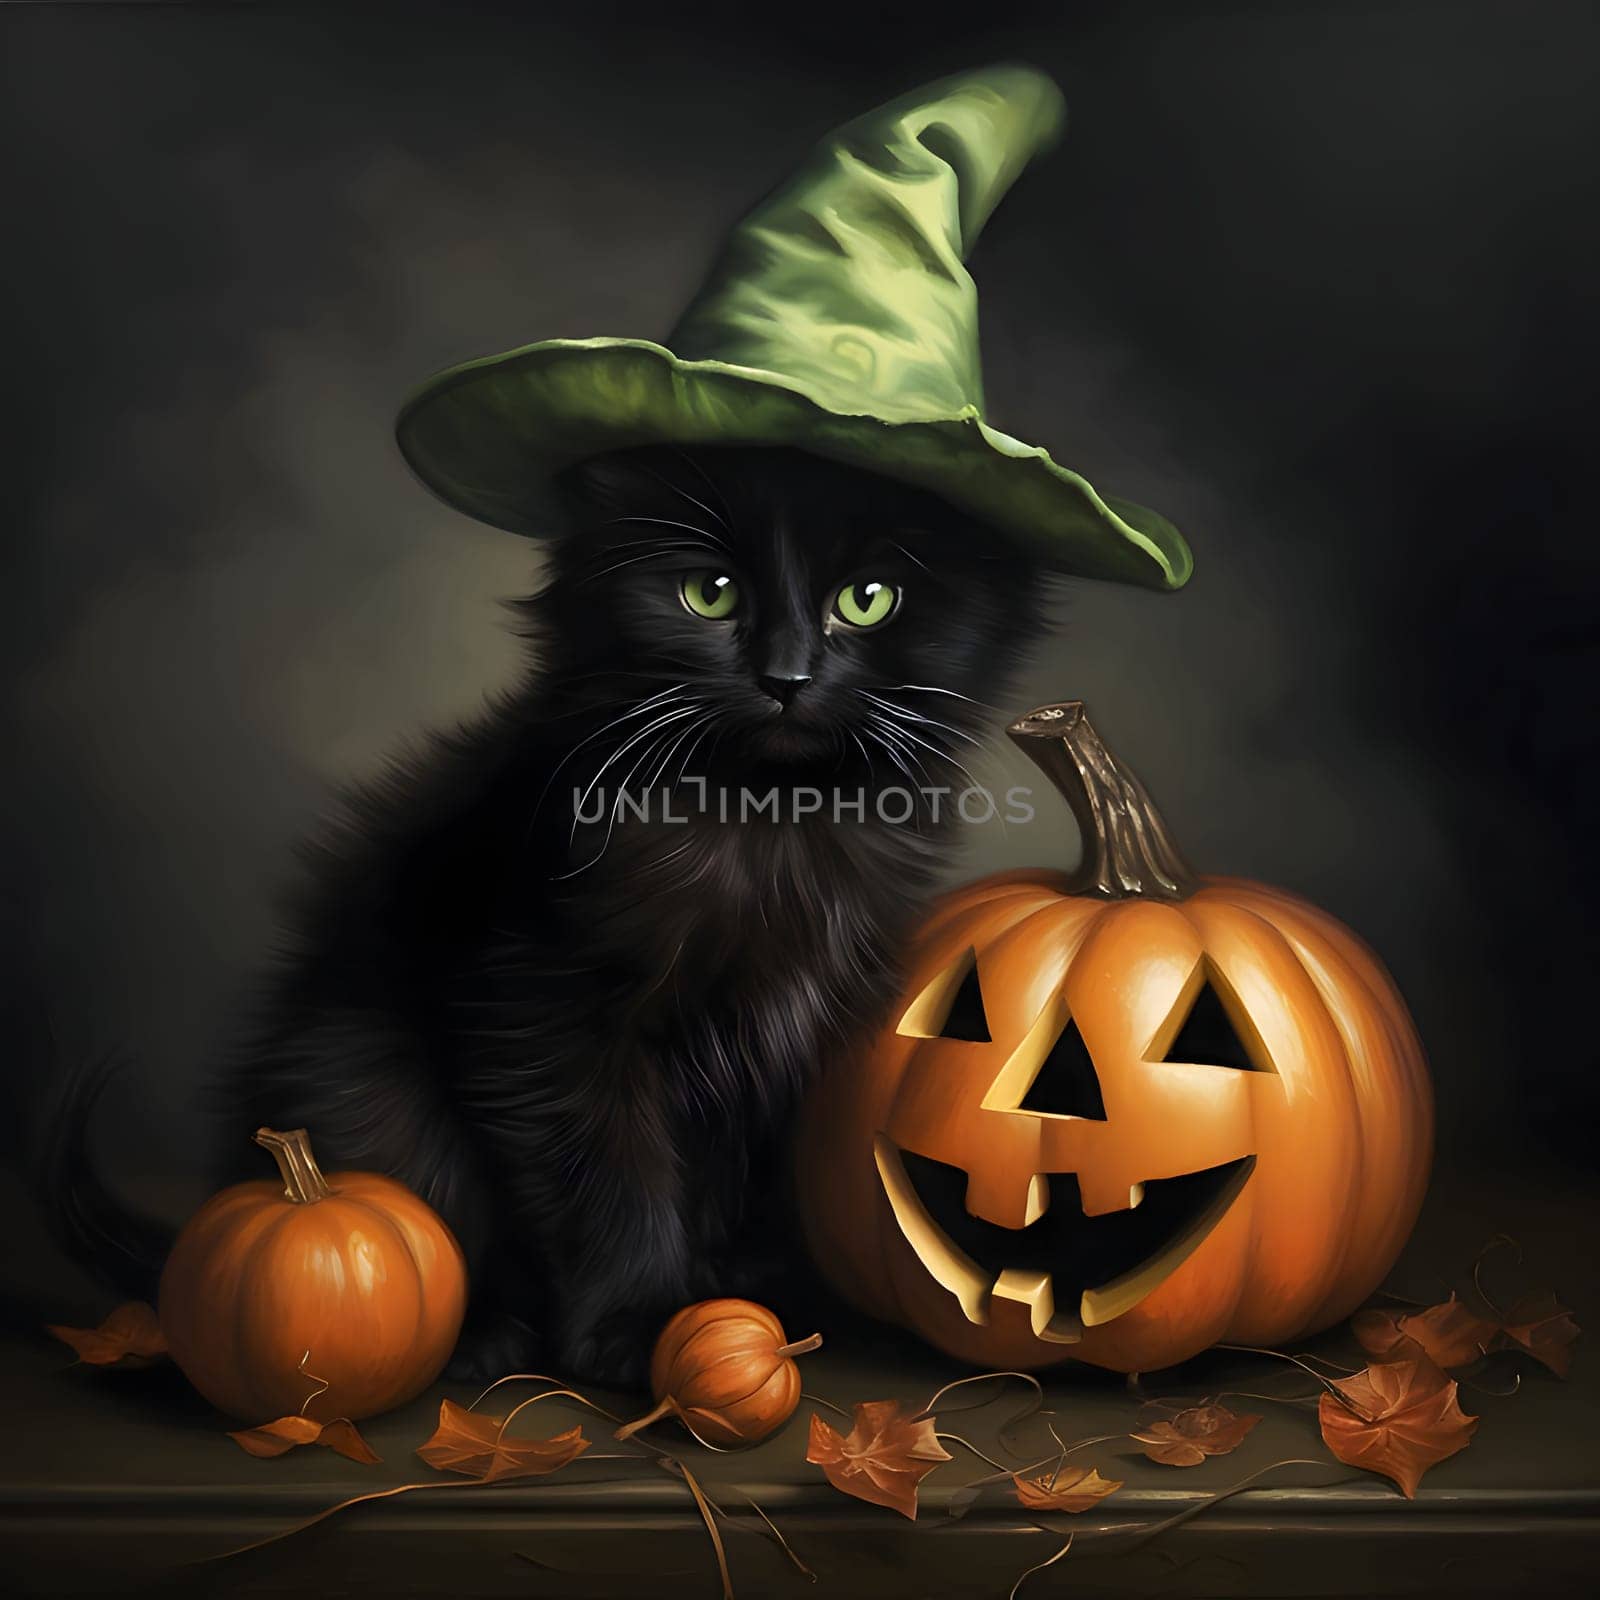 Black cat with green witch hat, next to it pumpkins dark smudged background., a Halloween image. by ThemesS